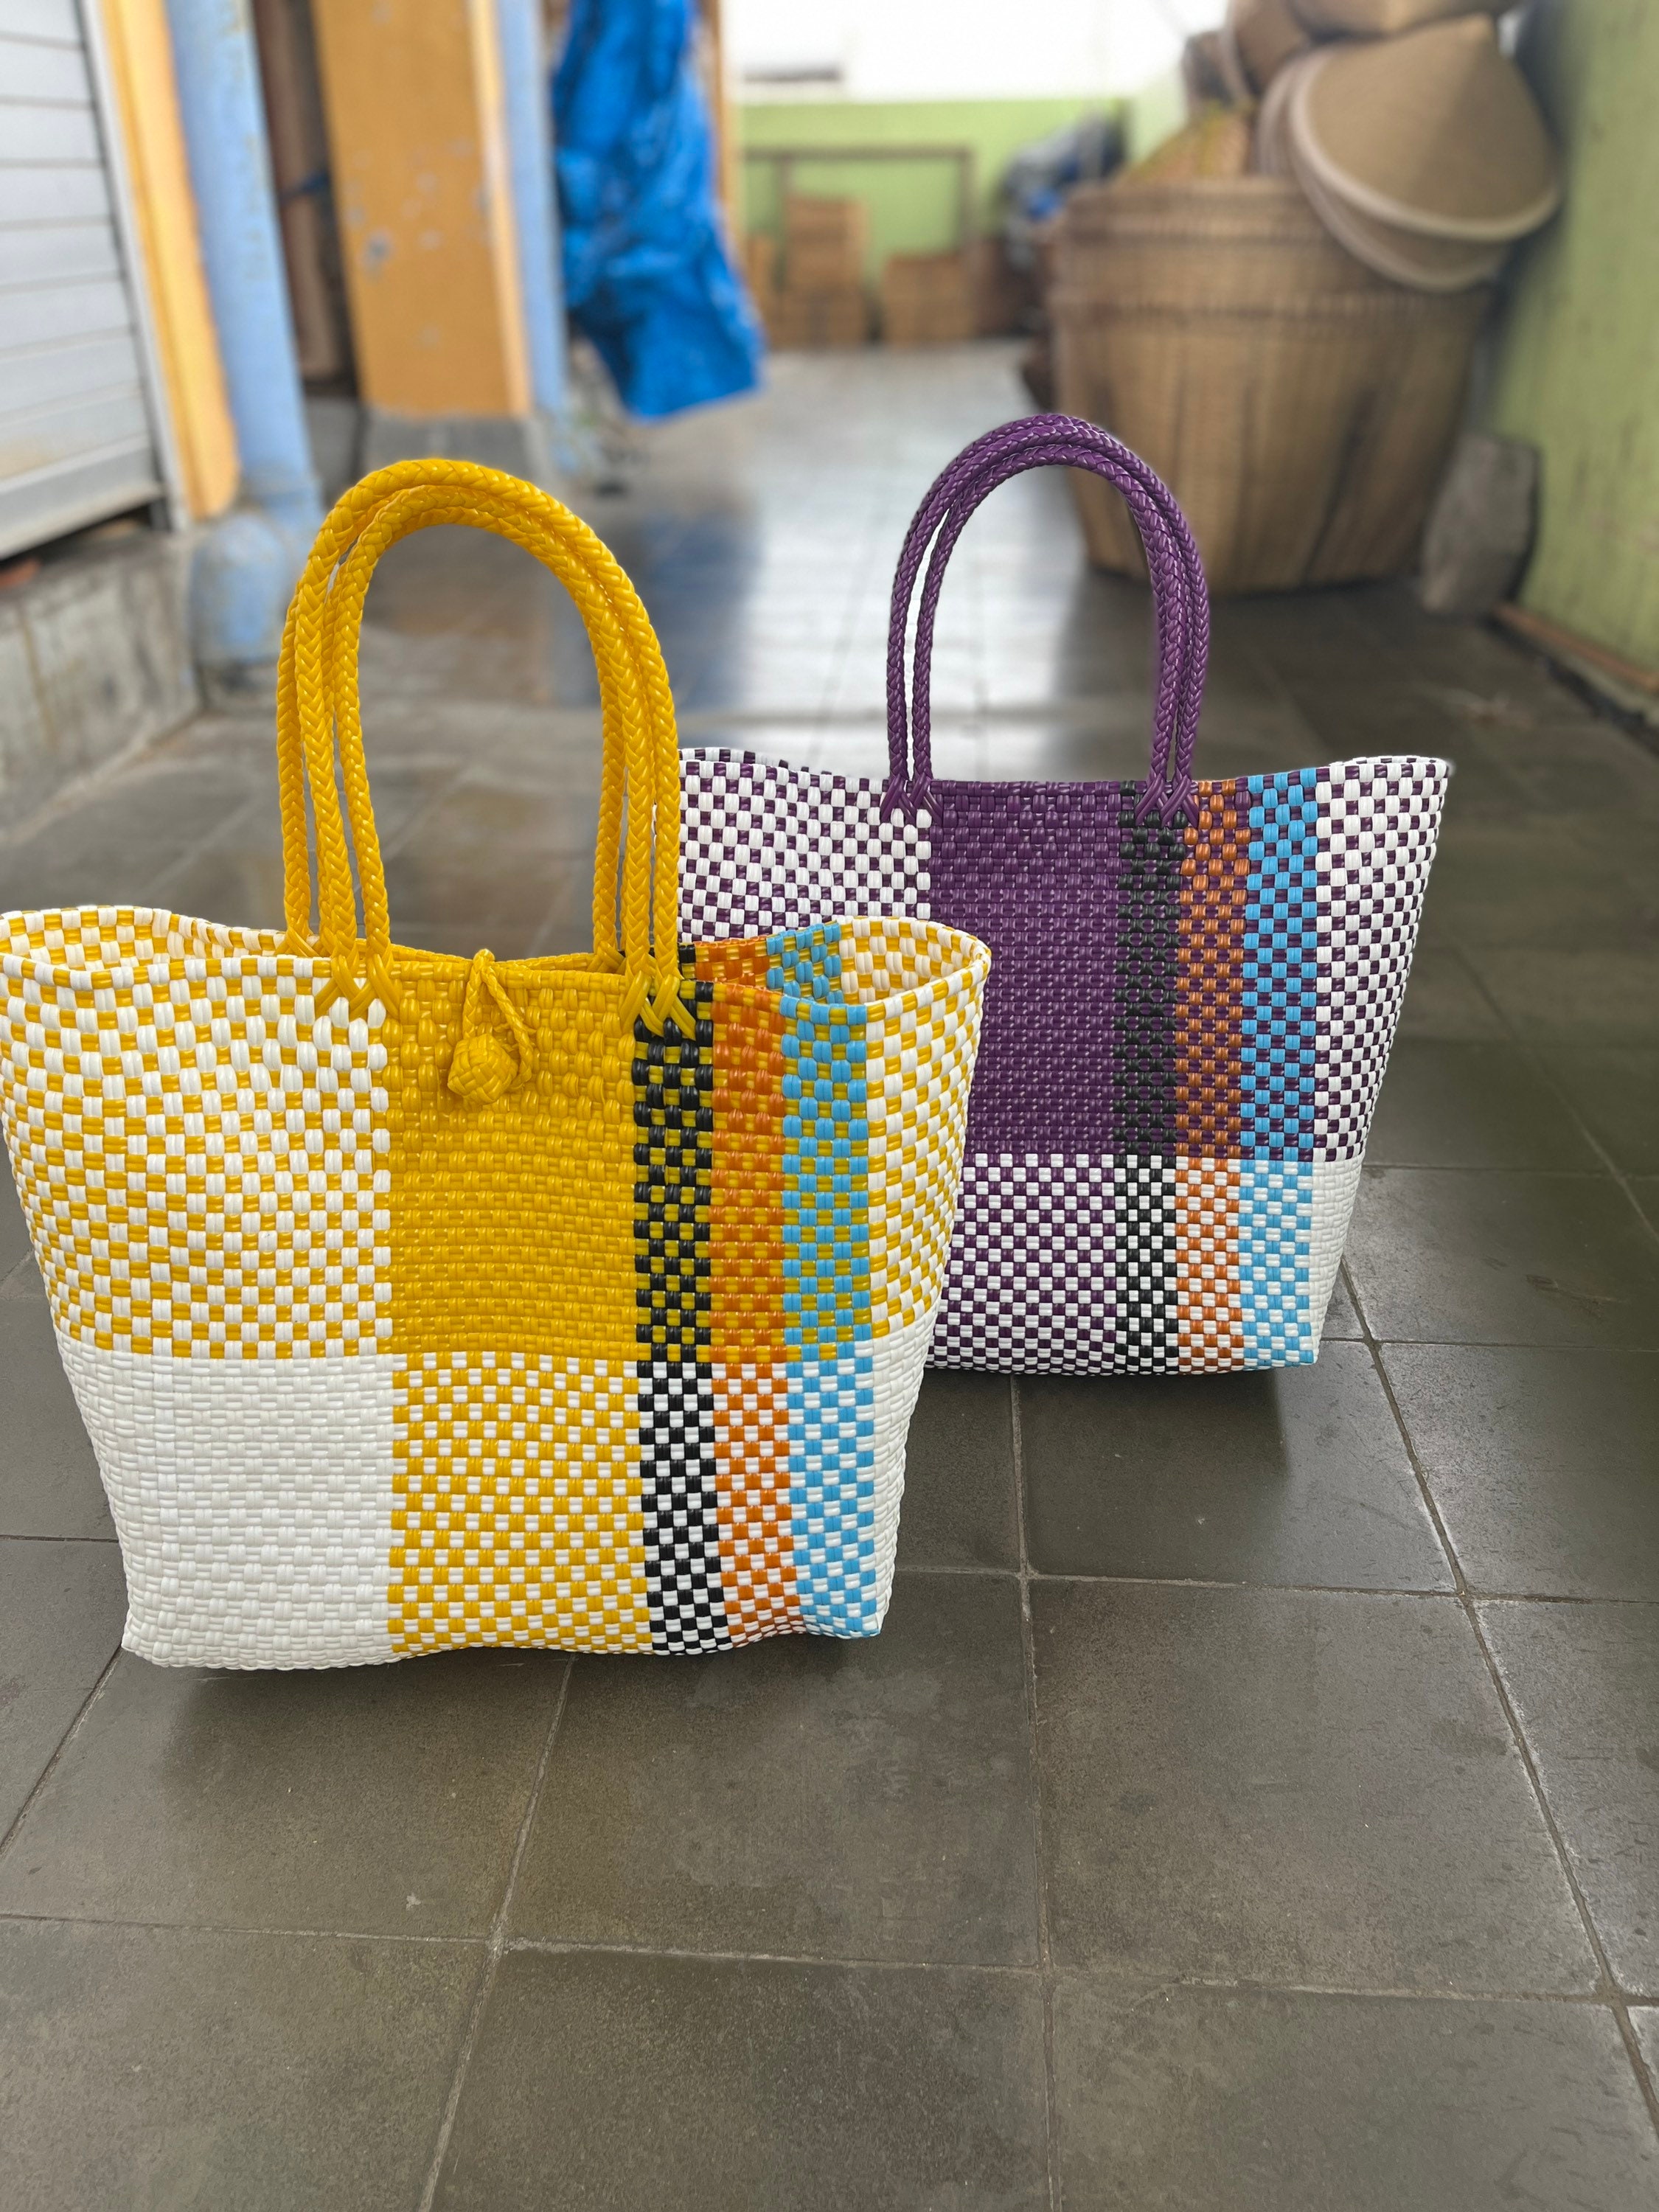 In a Former Life These Stylish Bags Were Plastic Bottles  Idea Center   Leaderpromoscom